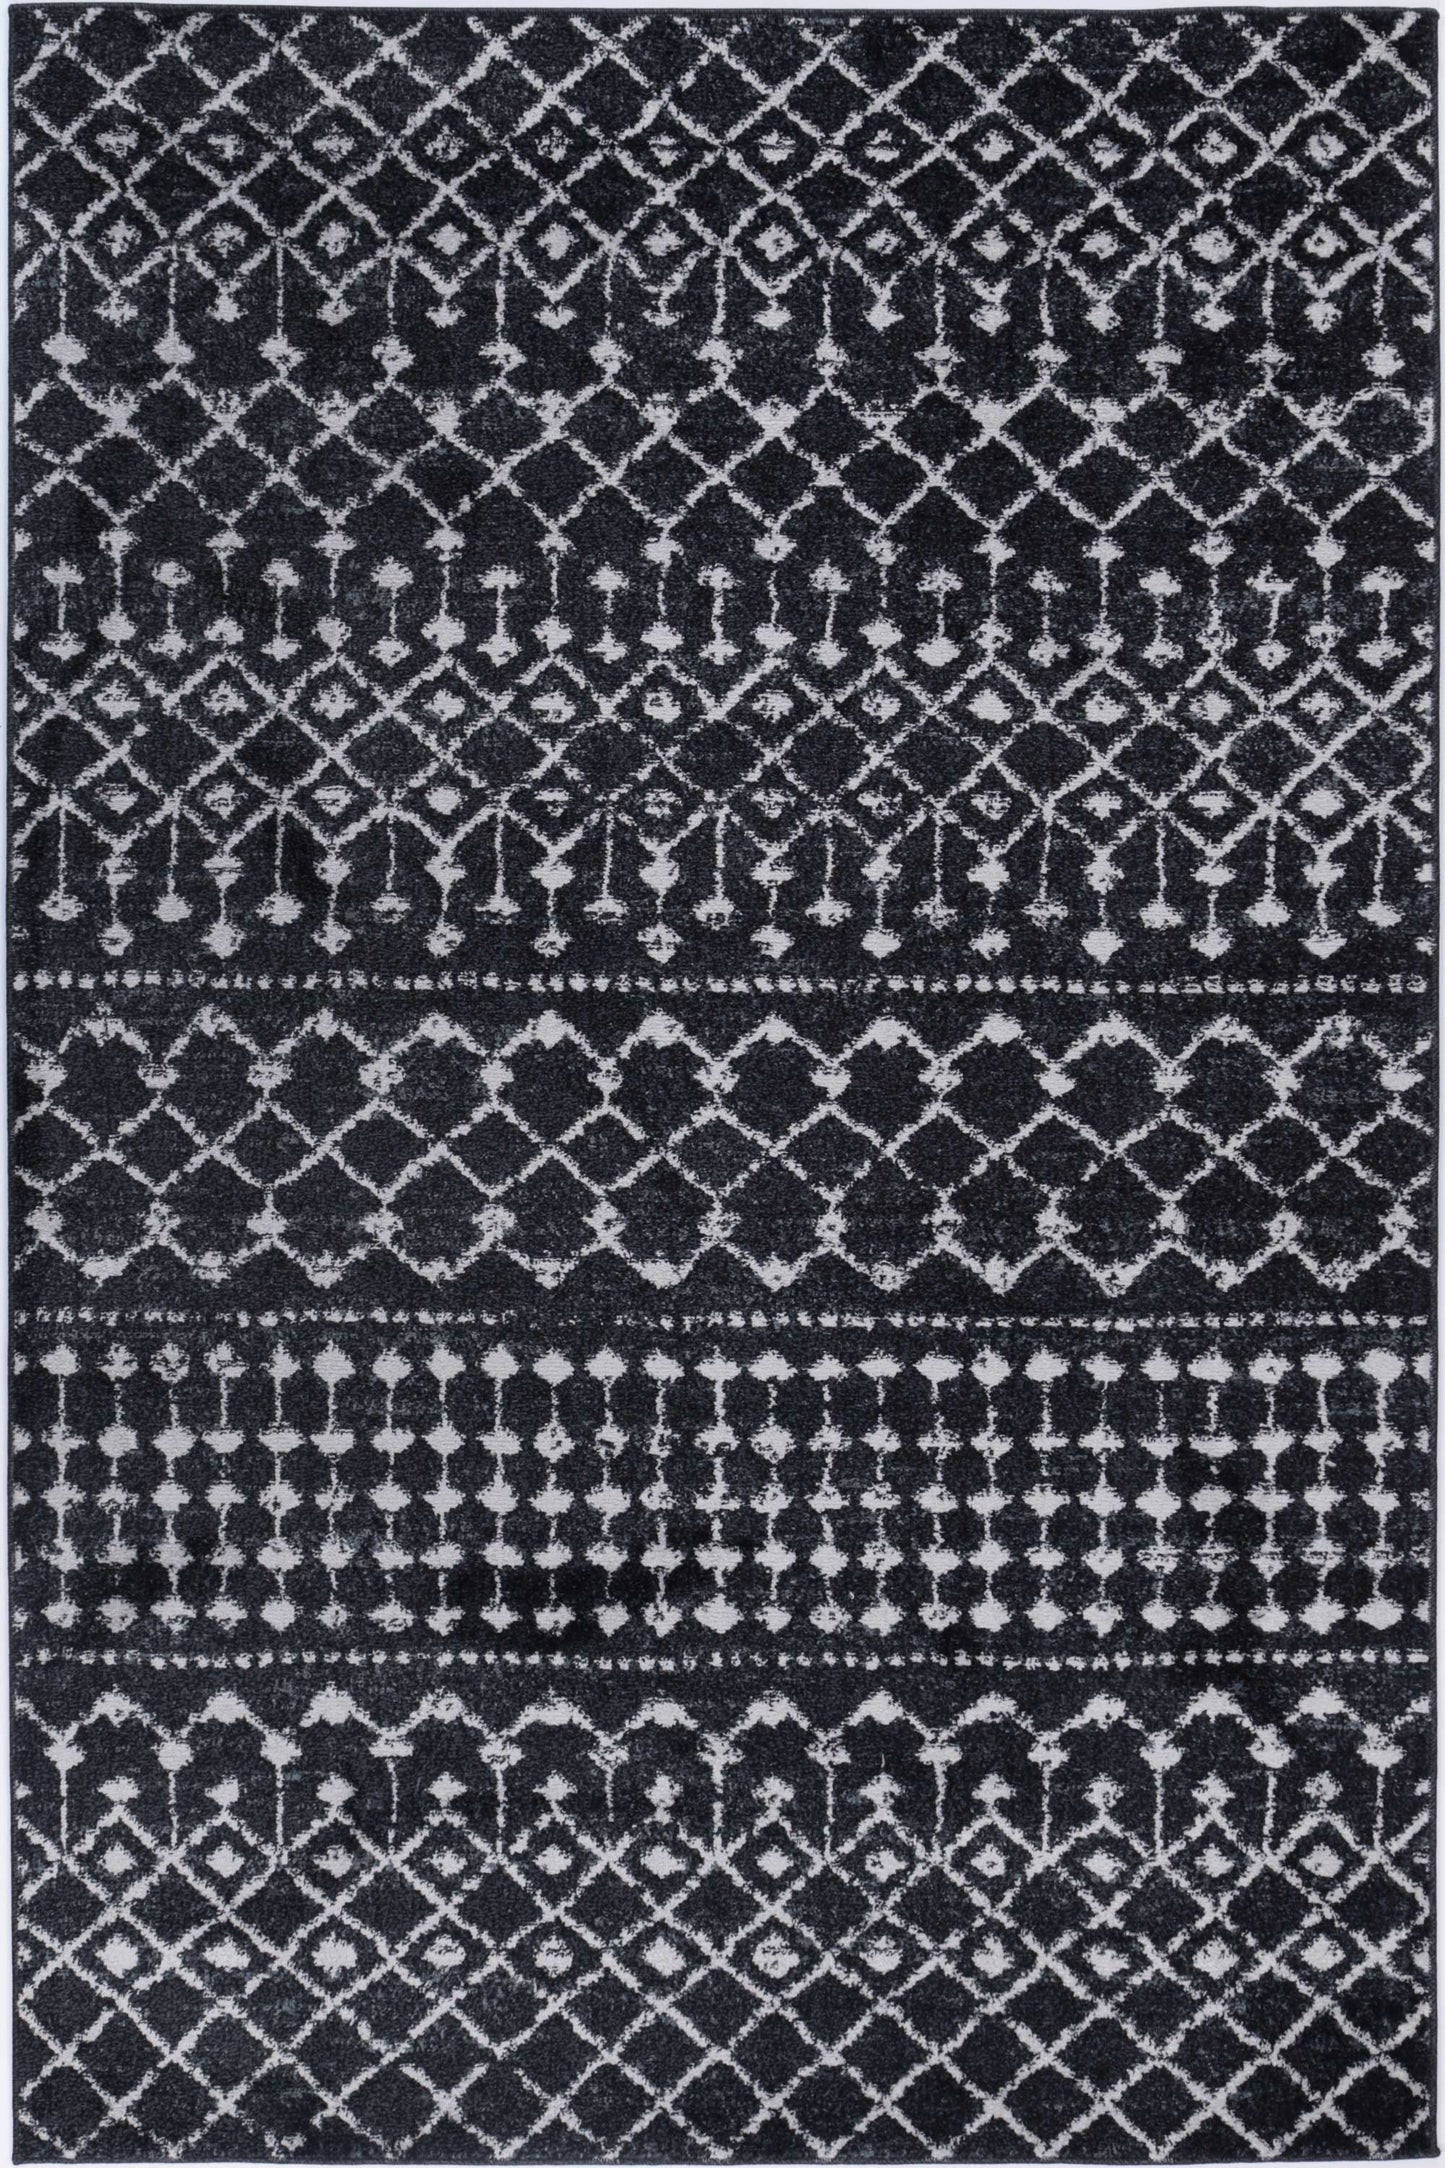 Bergen Repeats Black and White Rug